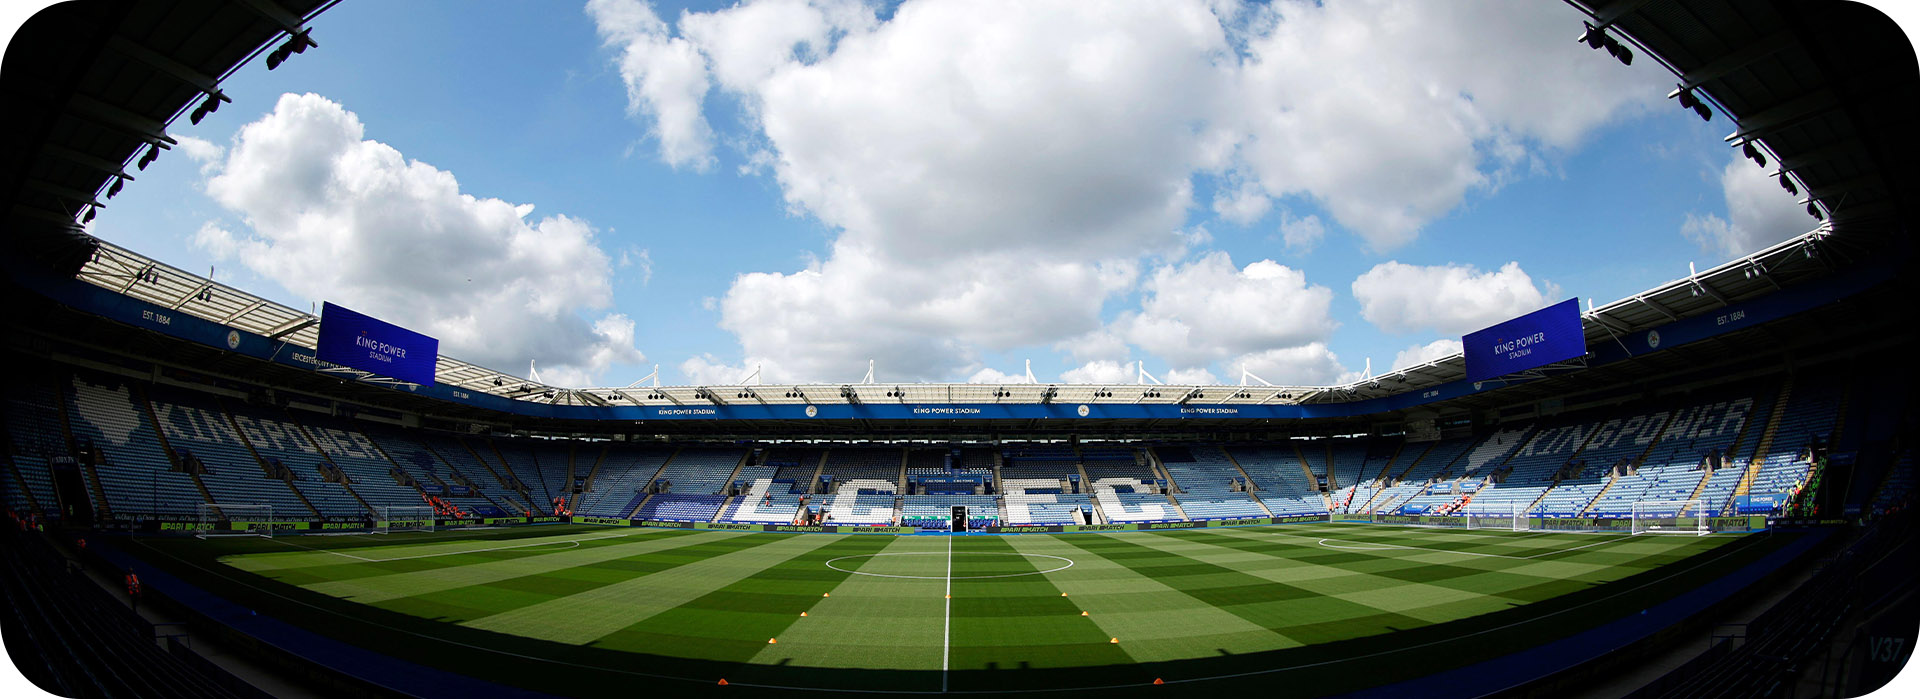 Photograph of the King Power